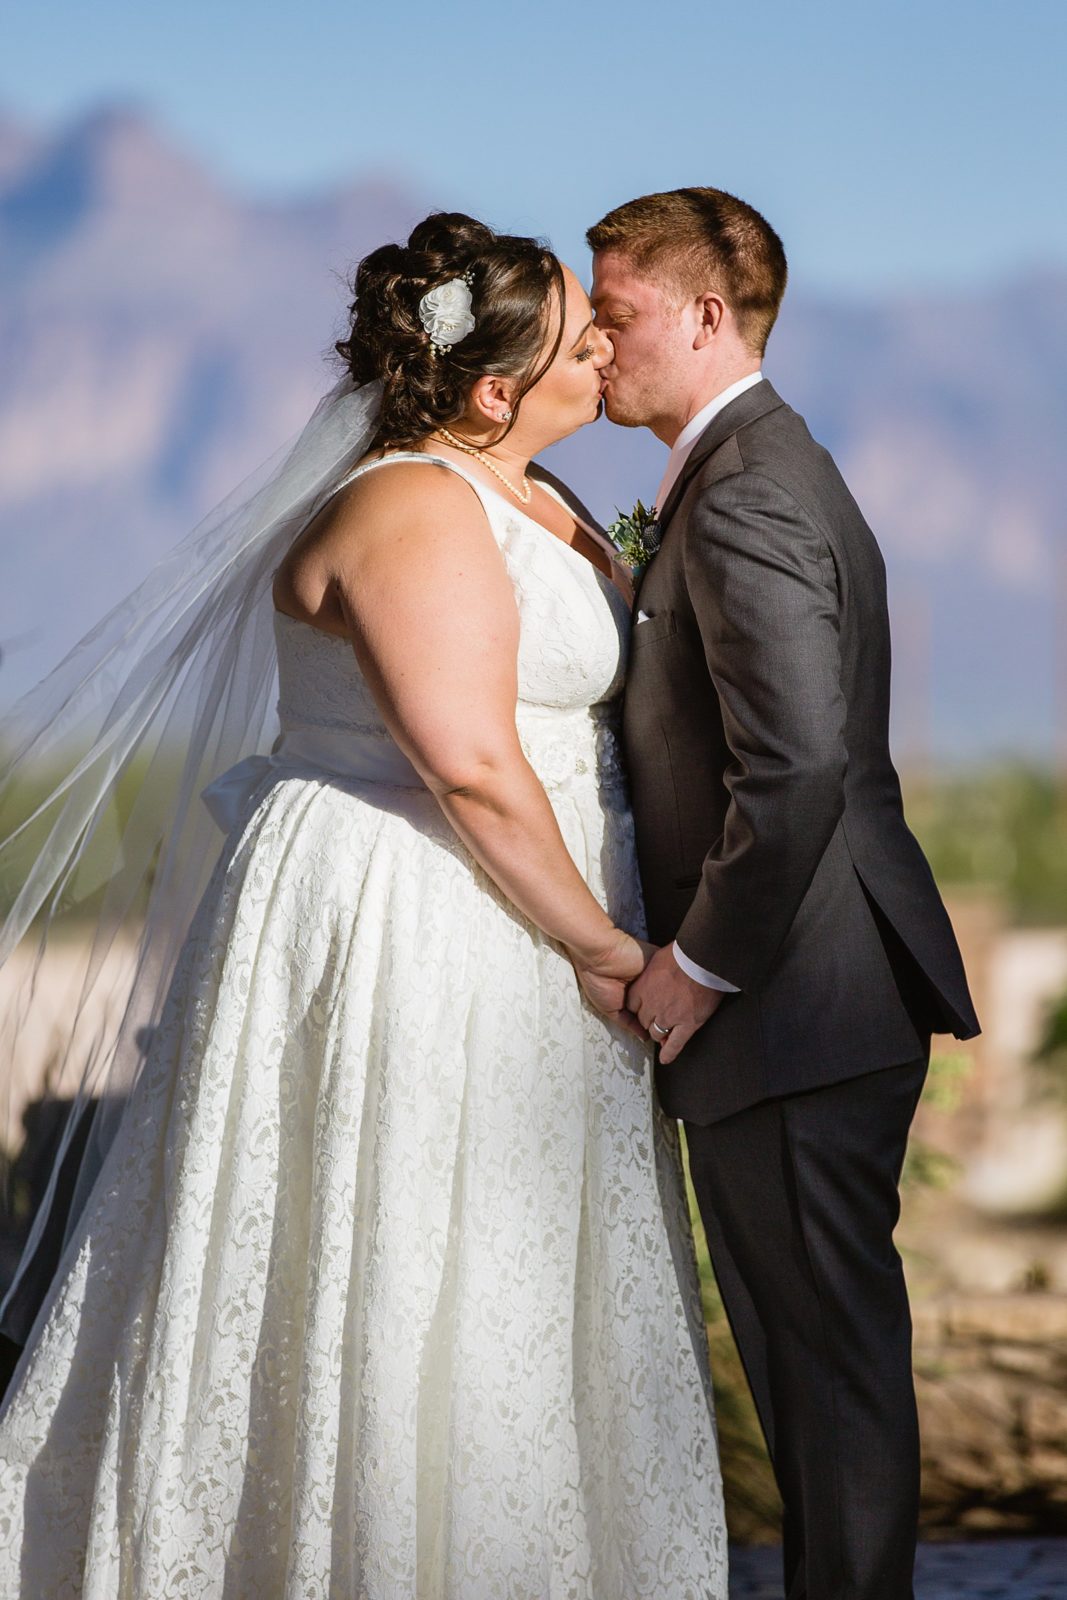 Bride and Groom share their first kiss during their wedding ceremony at Superstition Manor by Arizona wedding photographer PMA Photography.